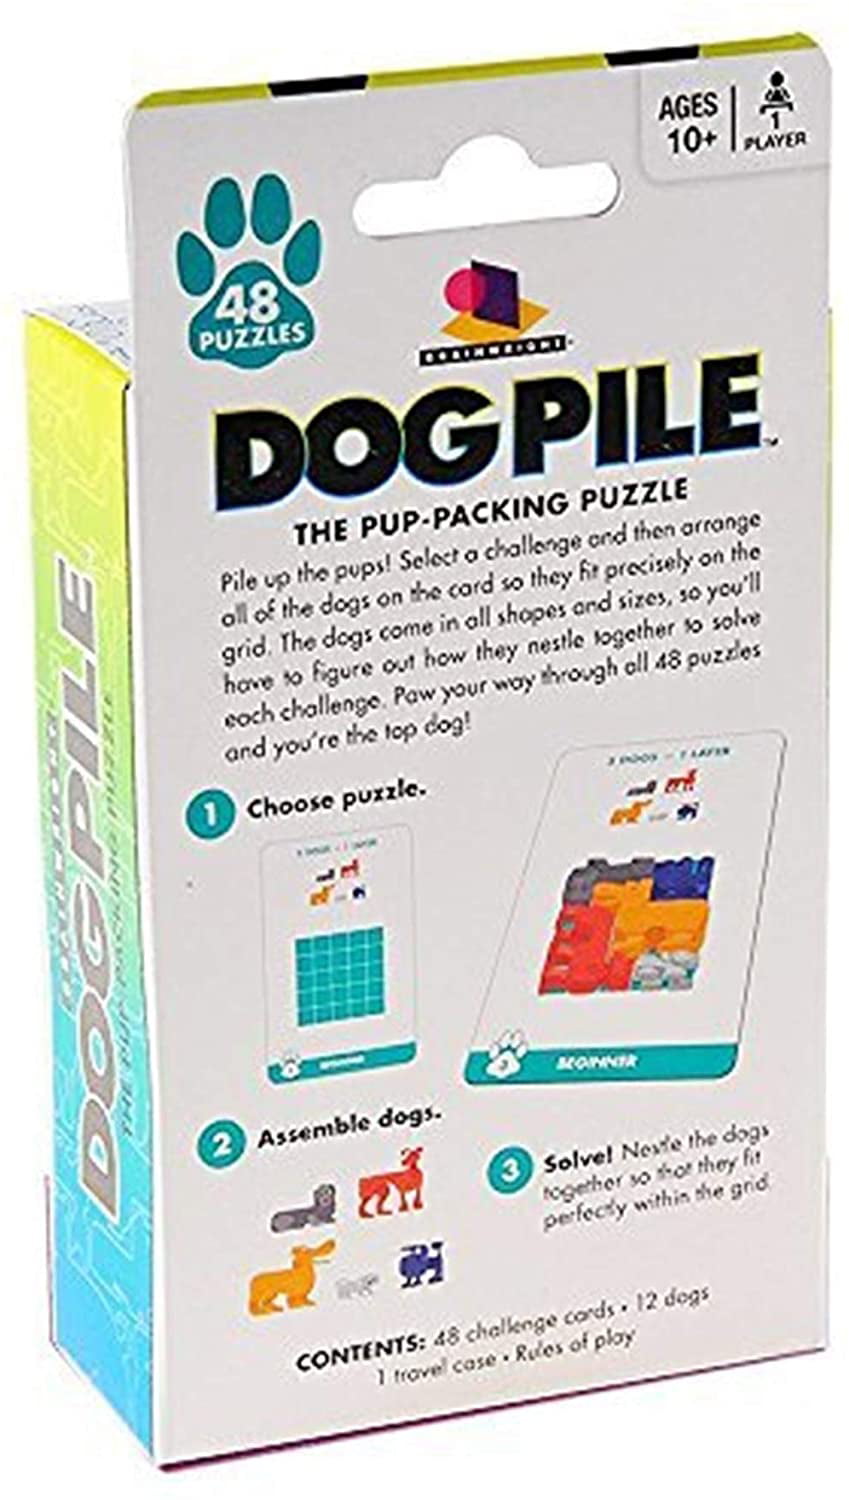 Puppy Pile by Thing 12 Games — Kickstarter